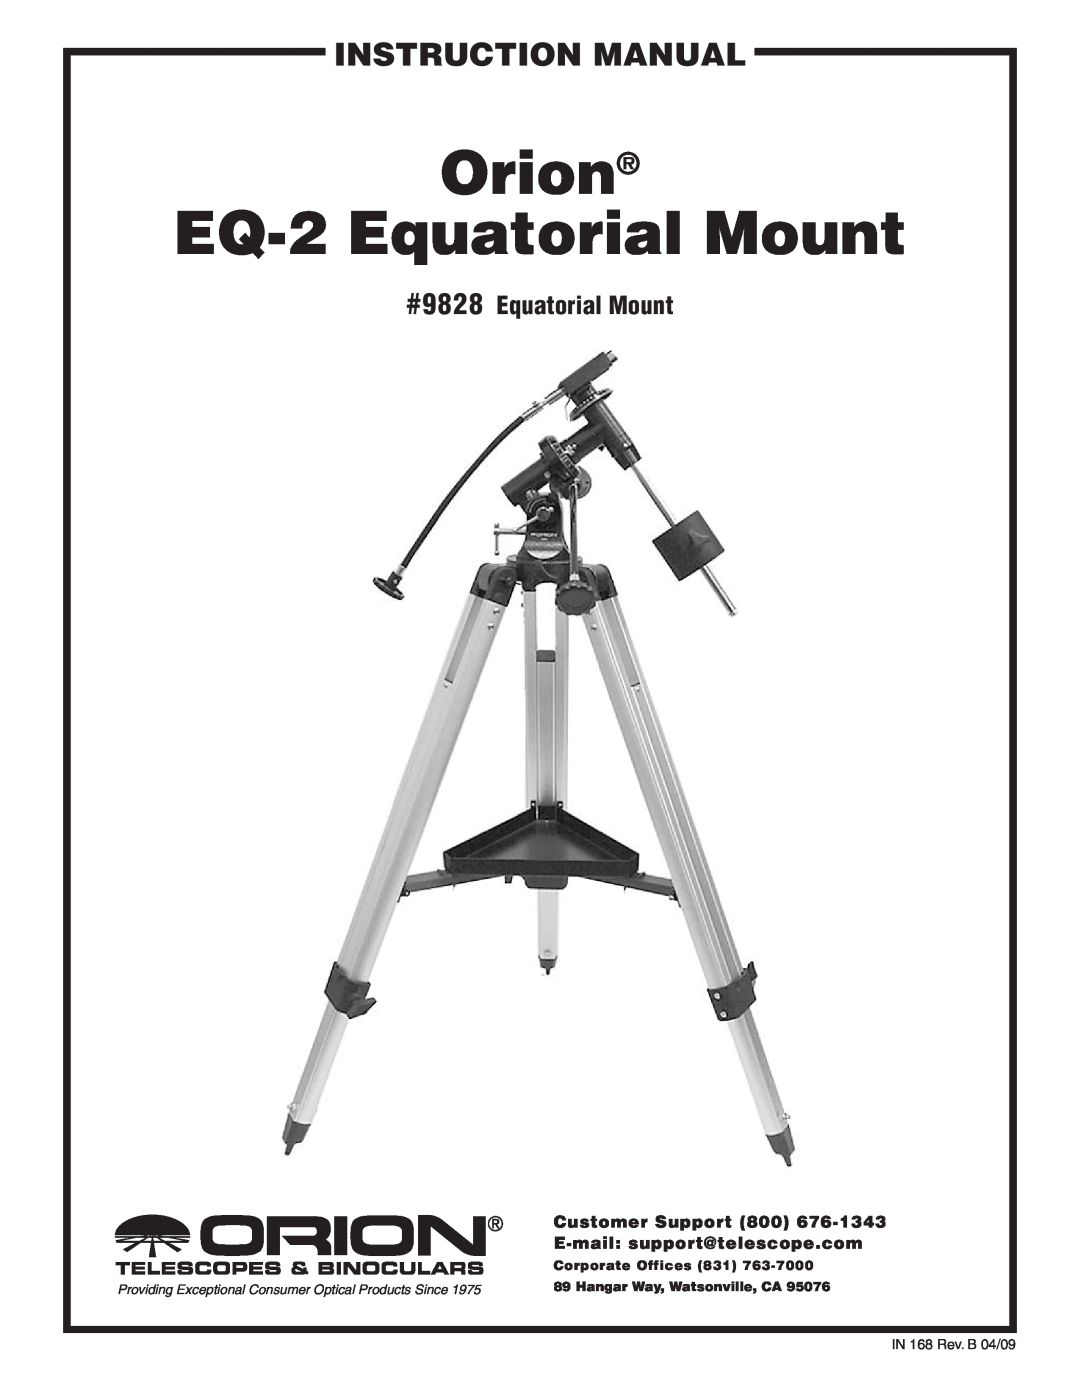 Orion instruction manual #9828Equatorial Mount, Orion EQ-2Equatorial Mount, Customer Support, Corporate Offices 